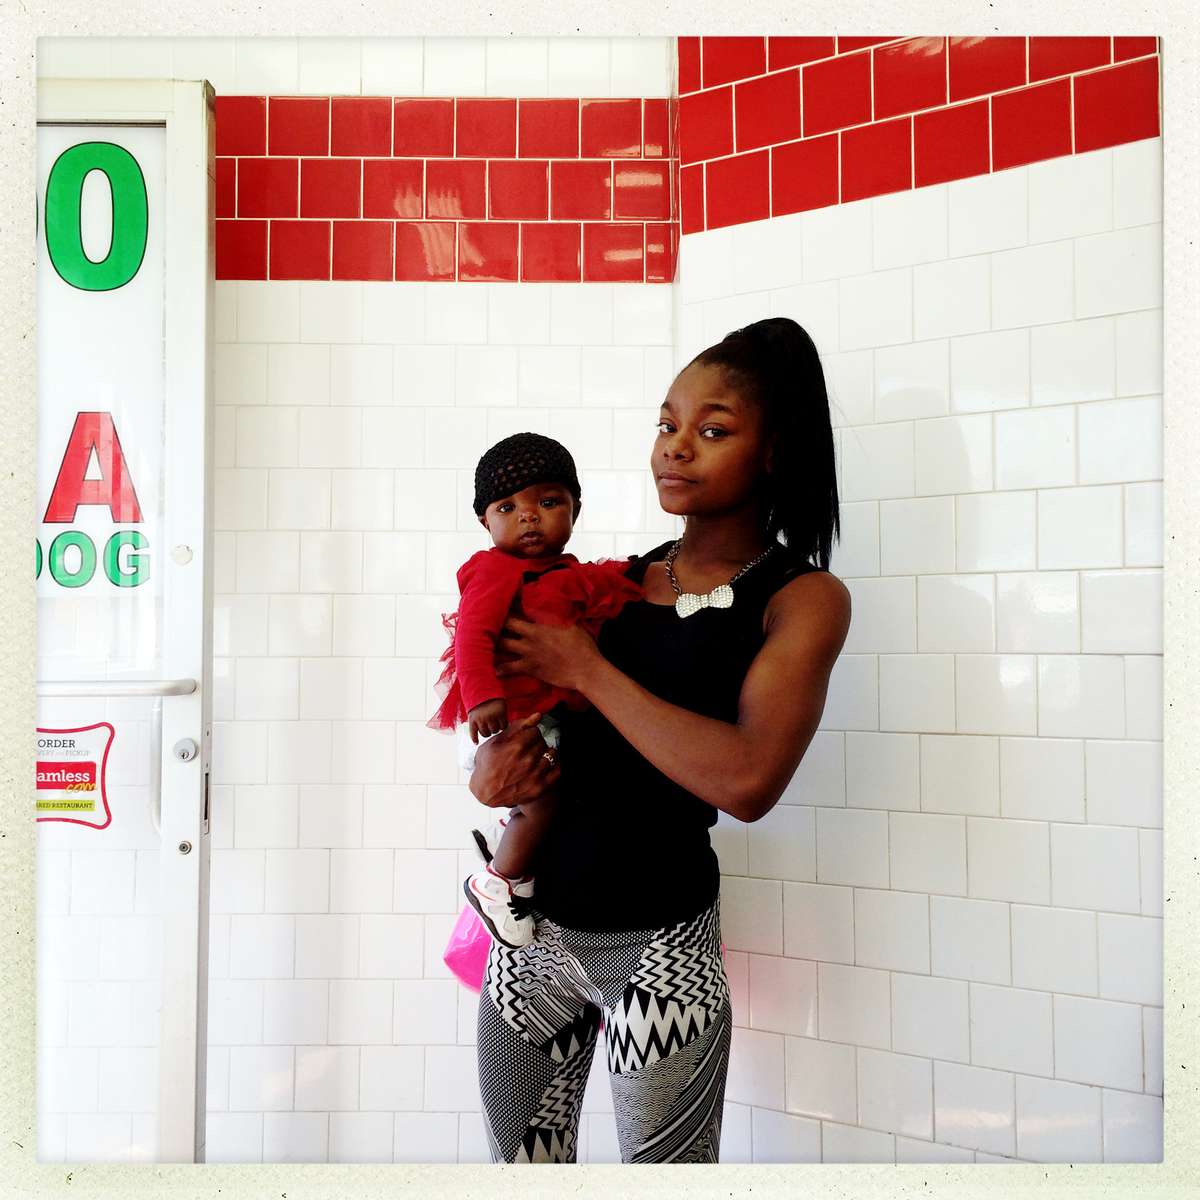 At the Corner: Shay, 23 with her baby